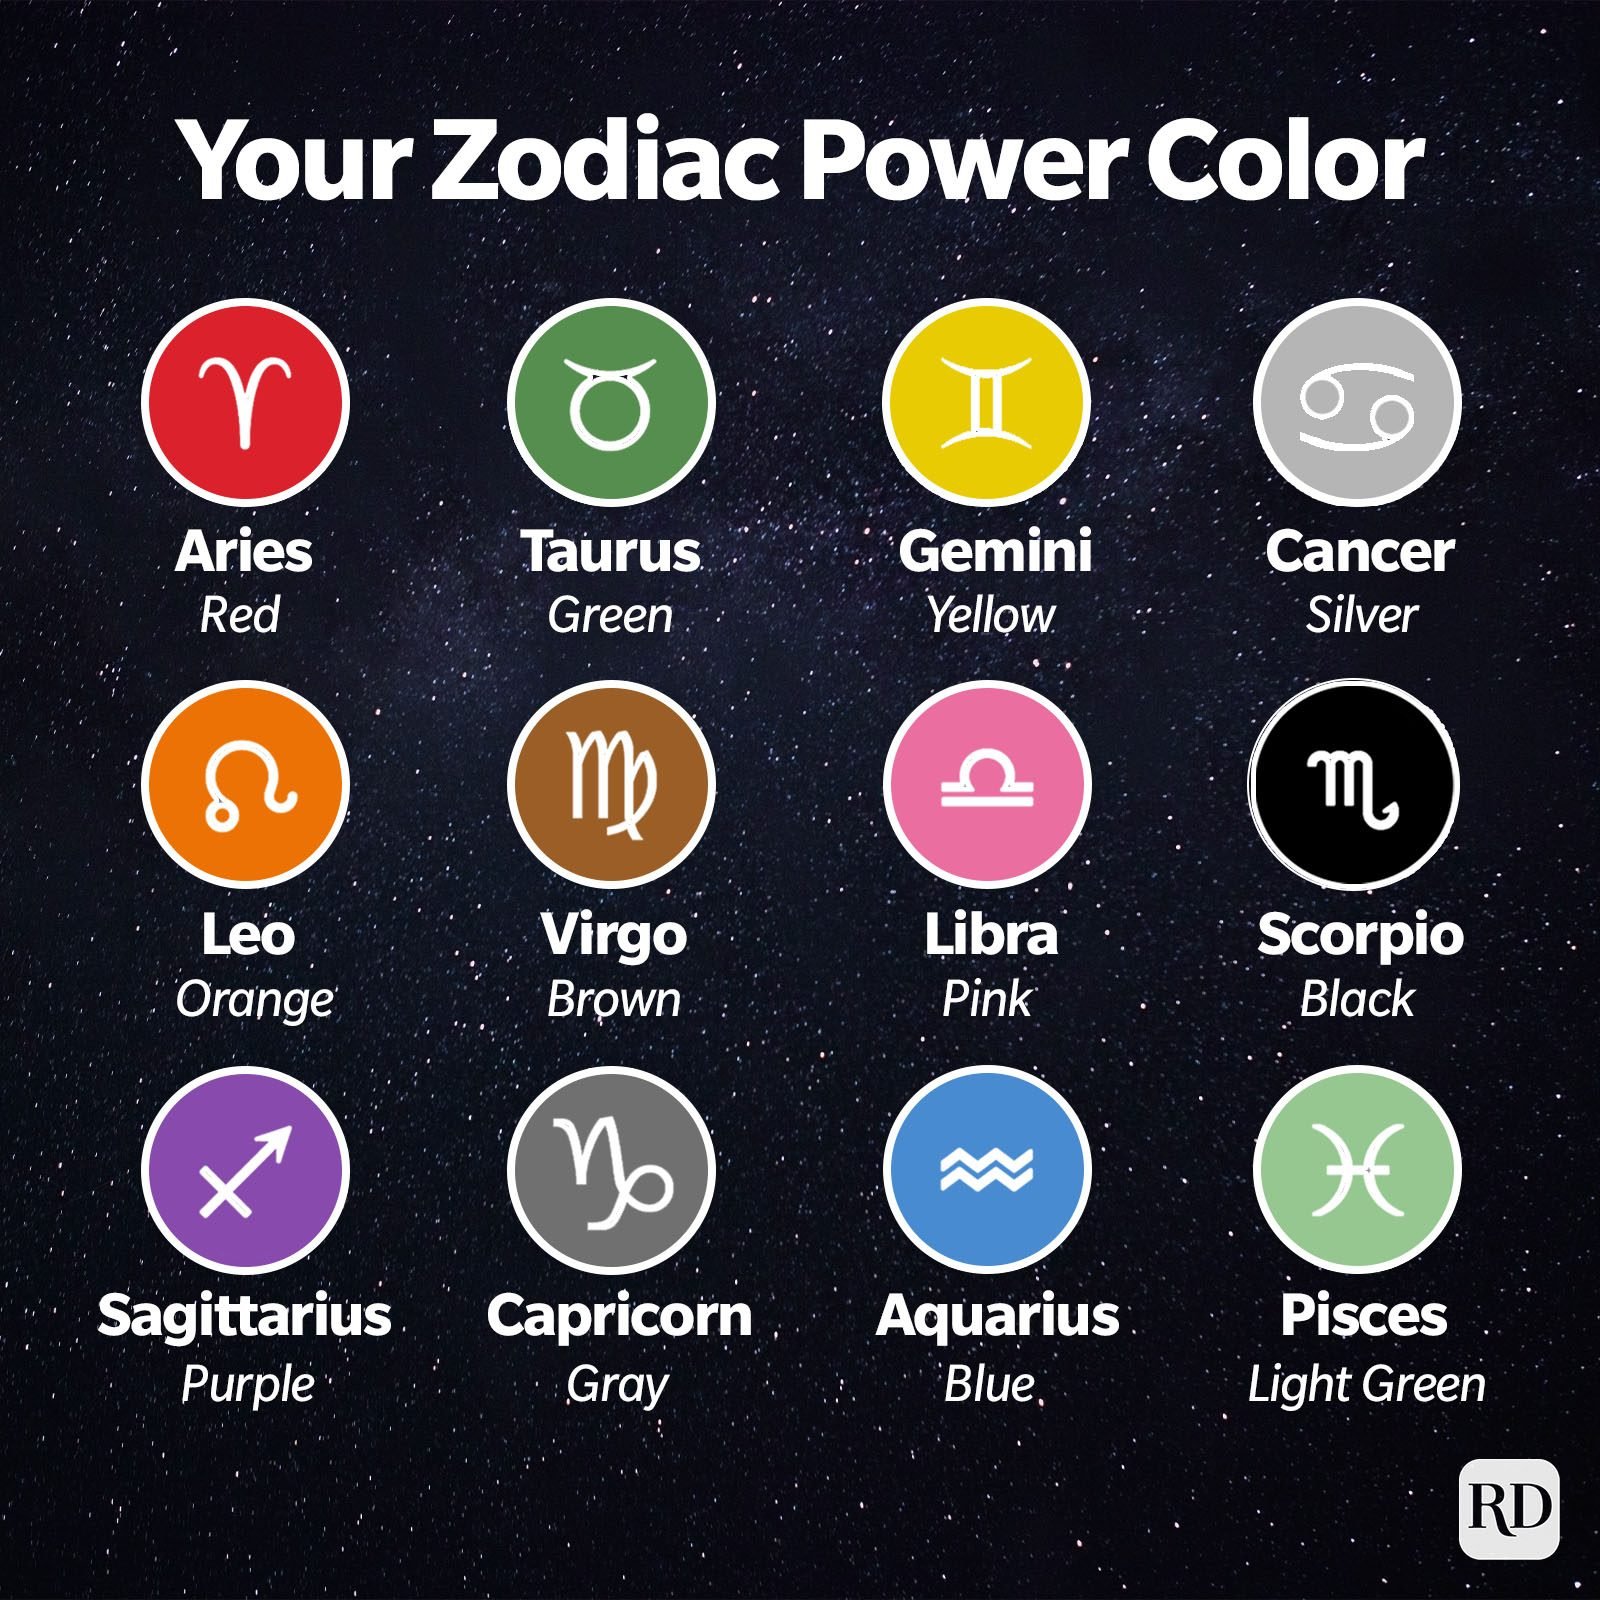 What Are The Zodiac Signs Colors - www.inf-inet.com